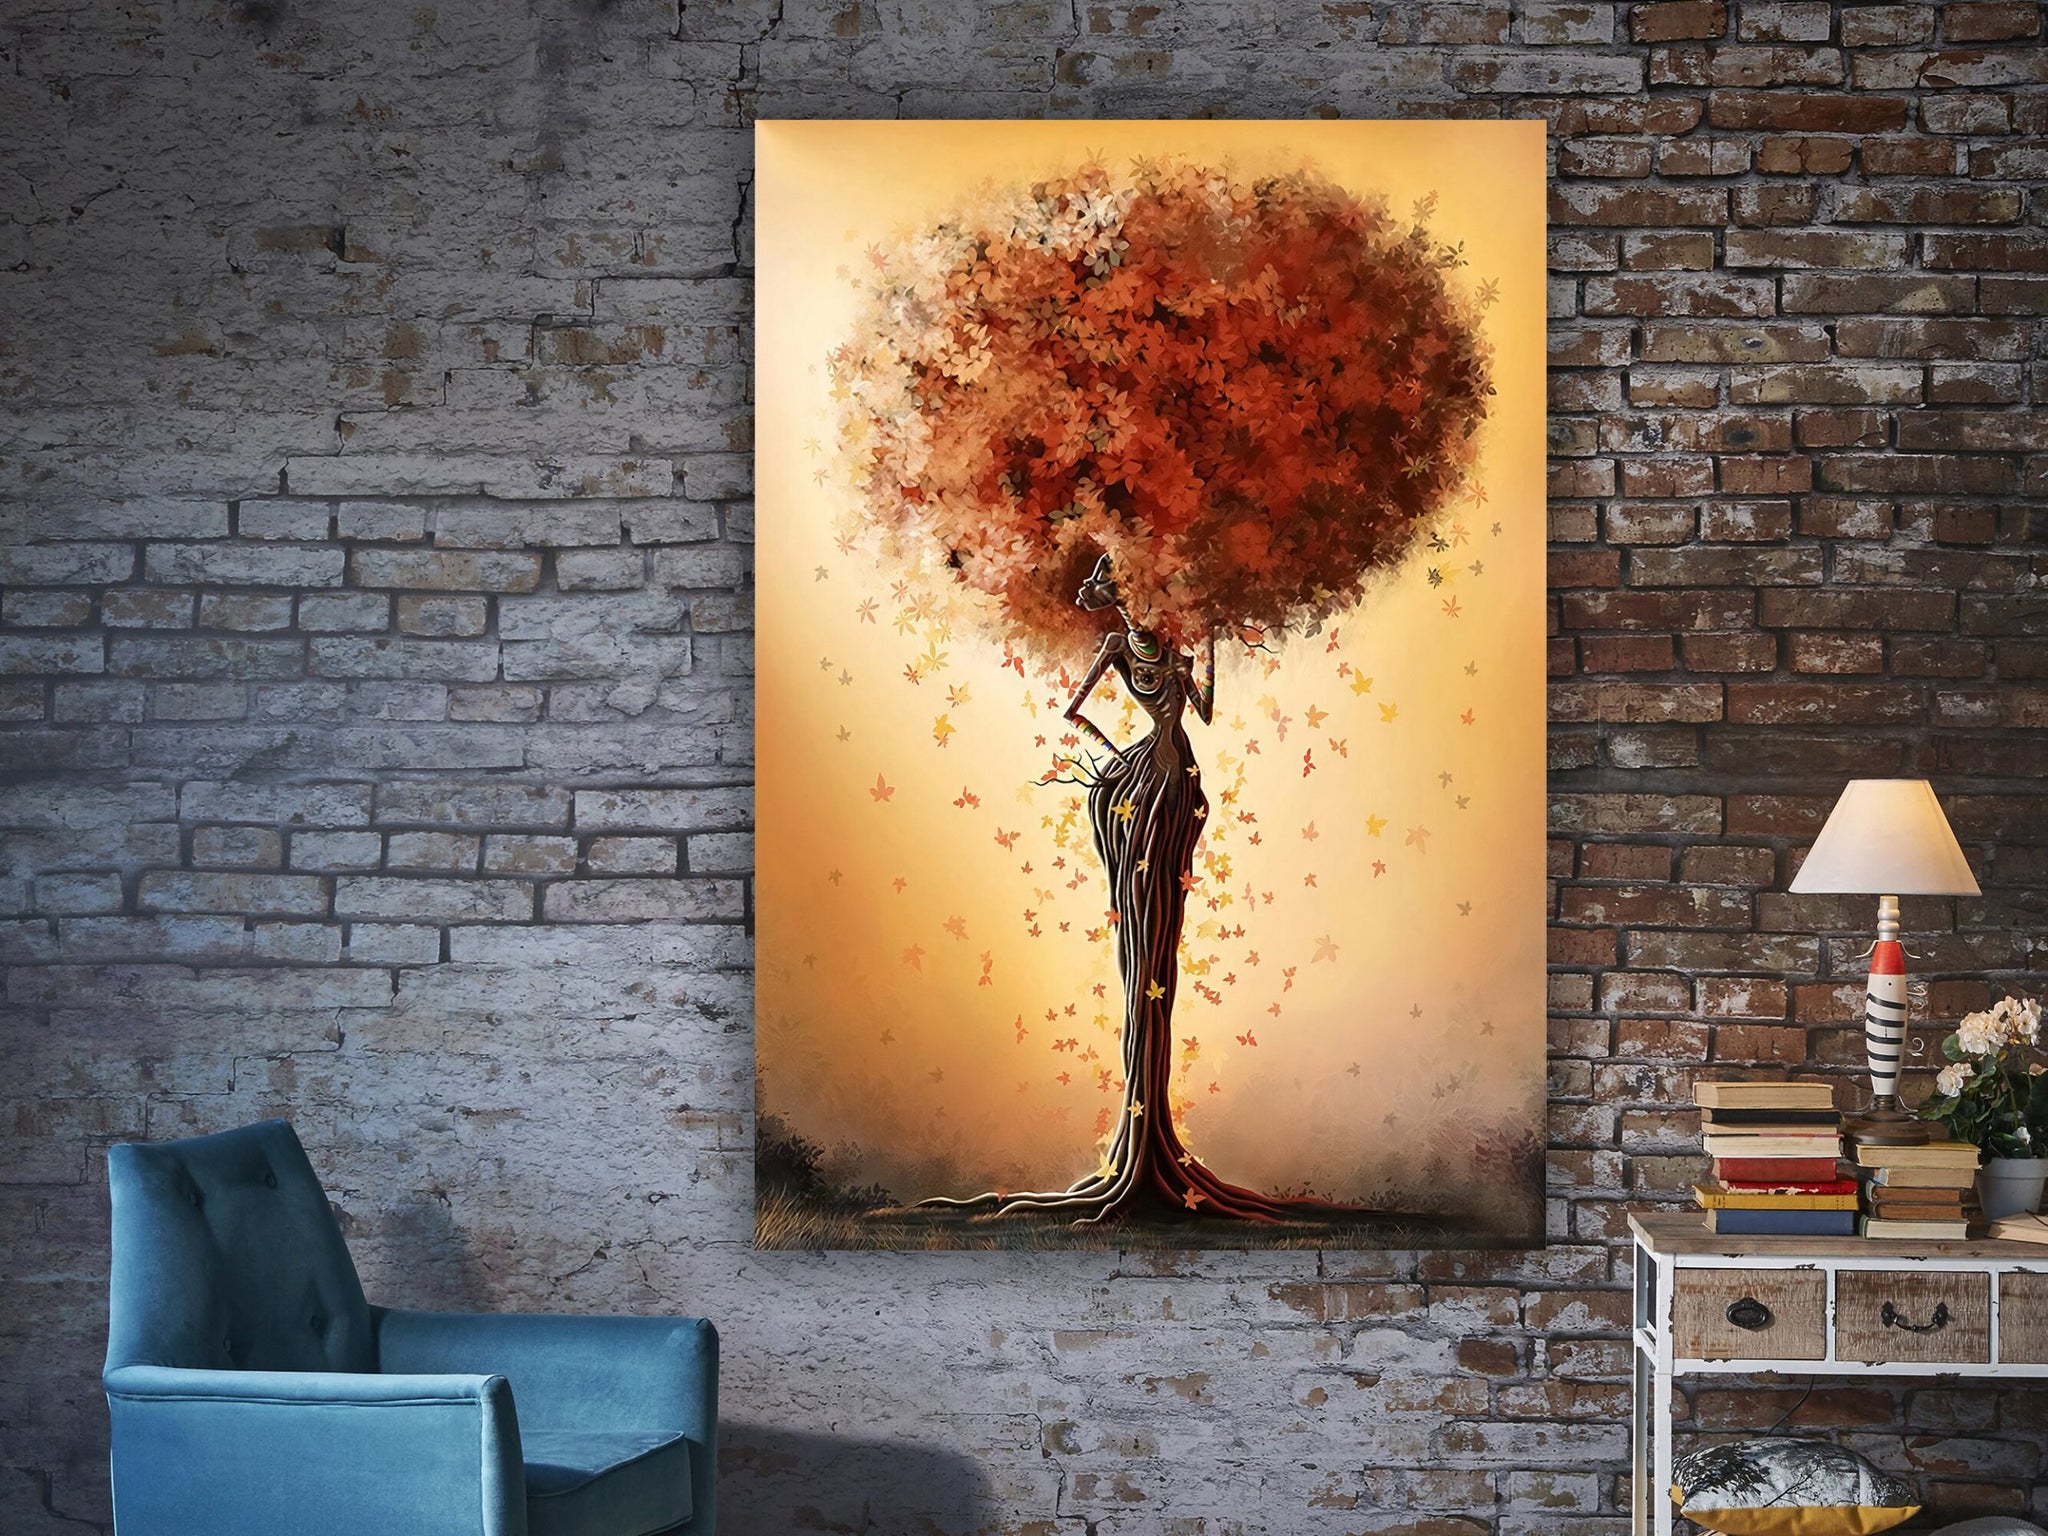 Yellow wood, female body, canvas print, art, landscape, contemporary home decor,  canvas with abstract canvas, surreal tree painting